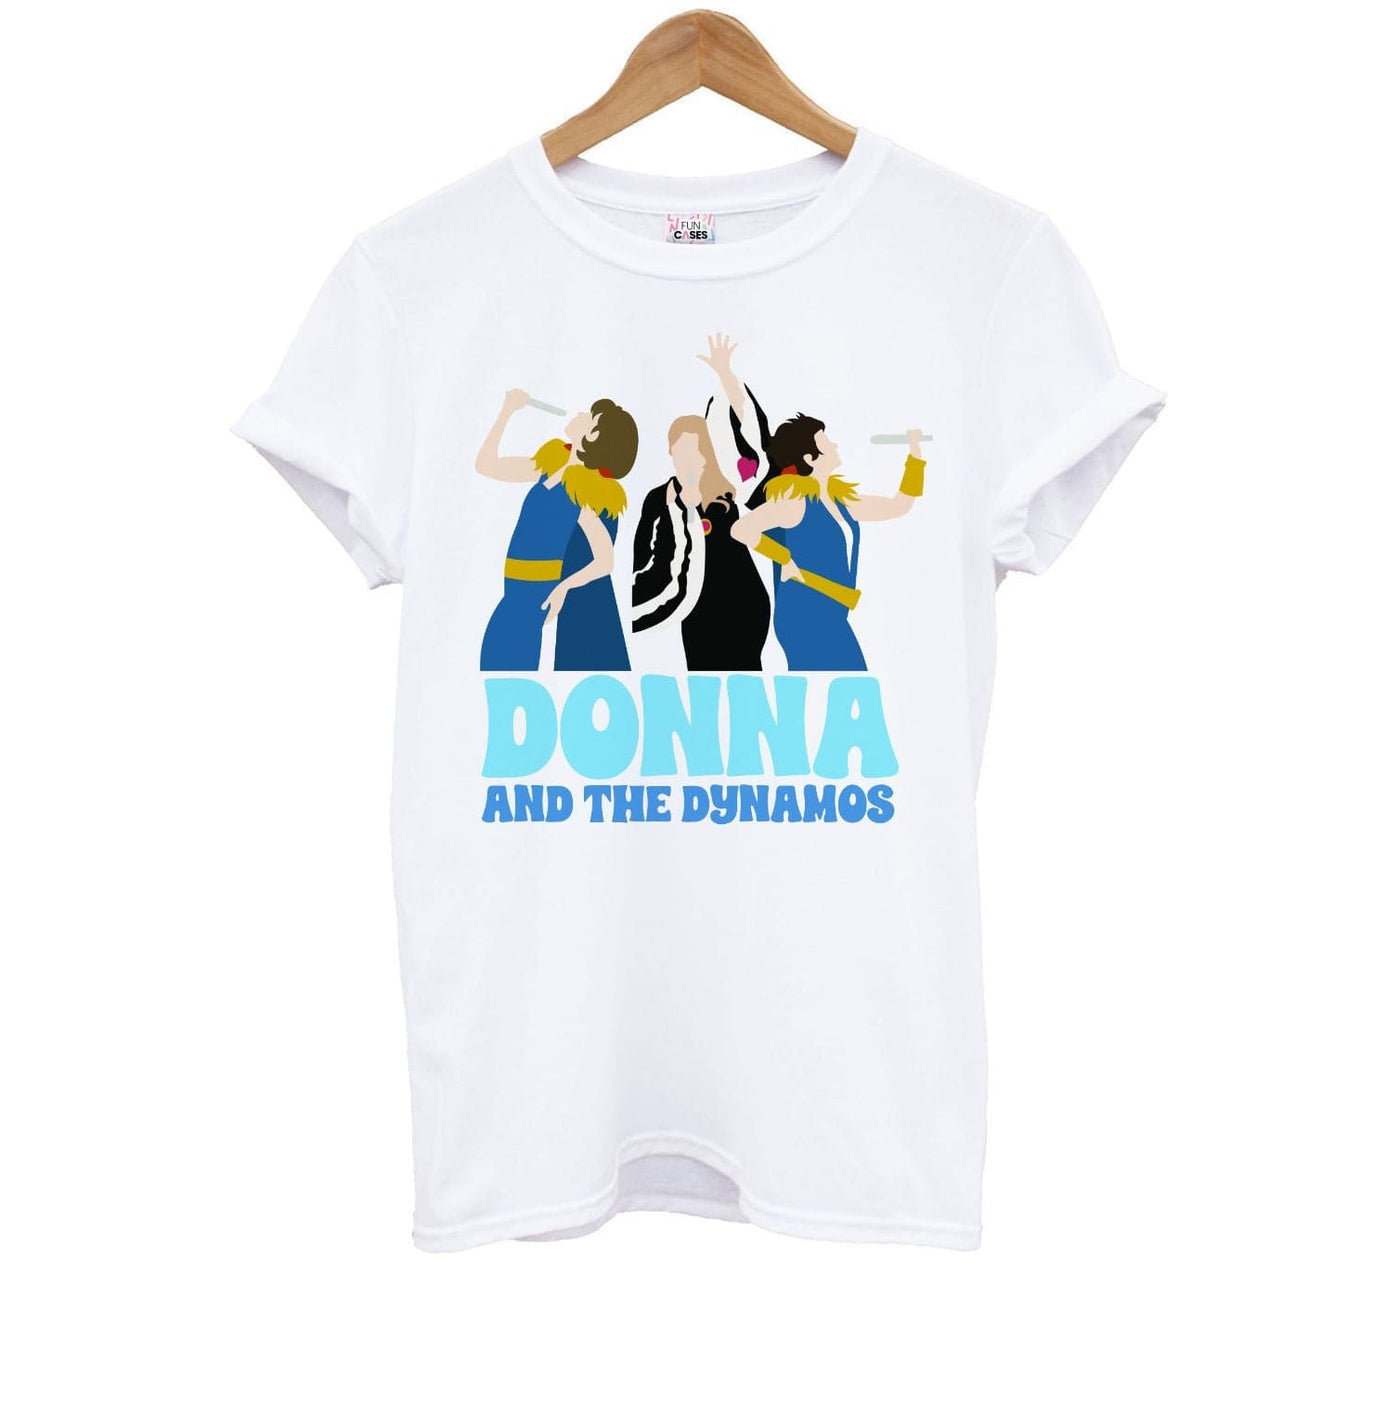 Donna And The Dynamos - Mamma Mia Kids T-Shirt